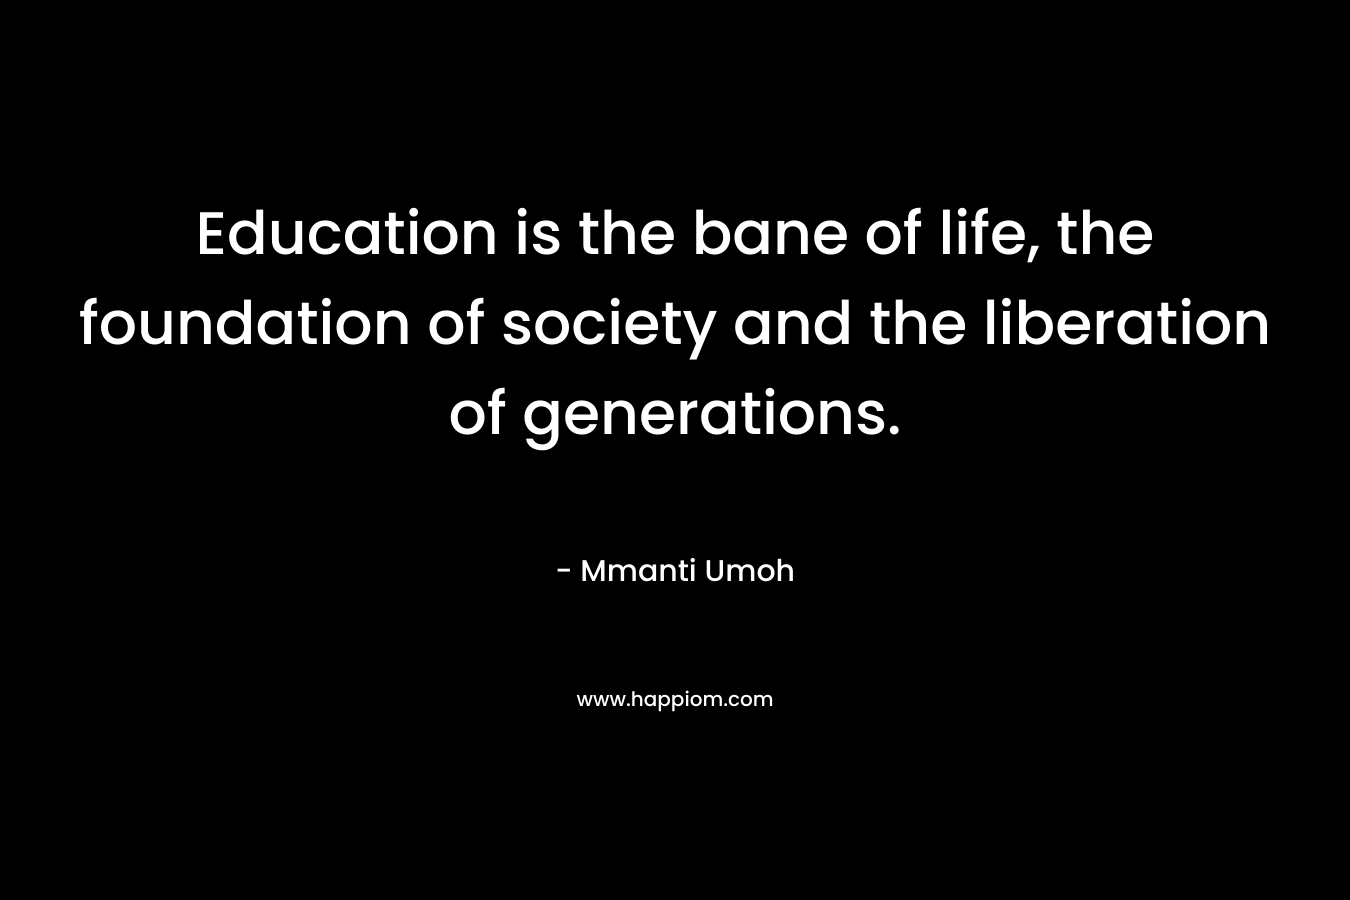 Education is the bane of life, the foundation of society and the liberation of generations. – Mmanti Umoh